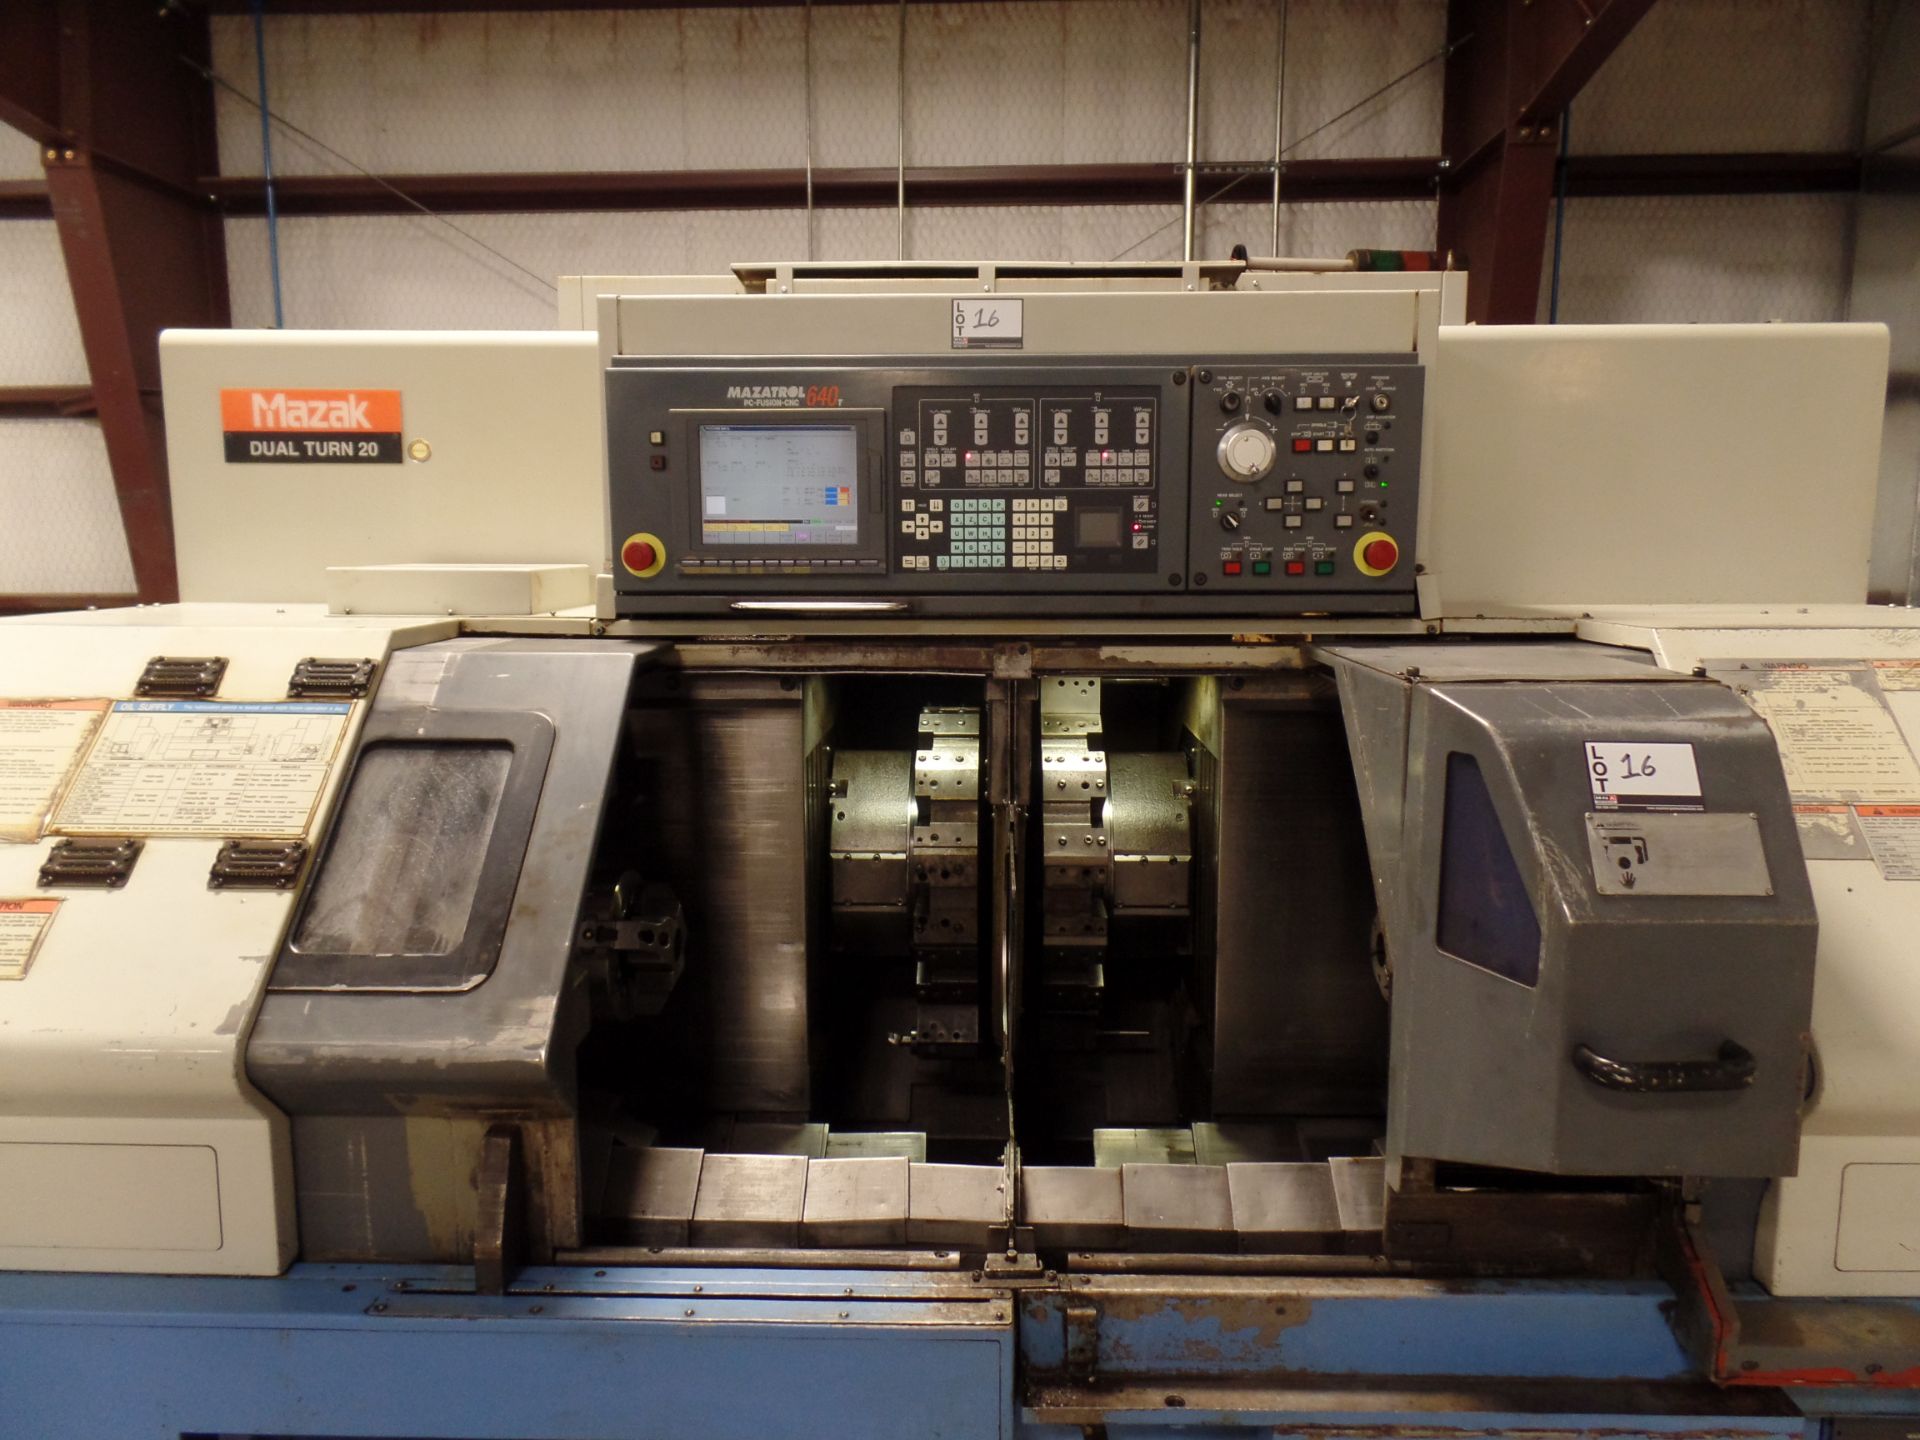 2003 Mazak Dual Turn 20 4 Axis Twin Spindle Twin Turret Opposed CNC Turning Center, rear discharge - Image 3 of 6